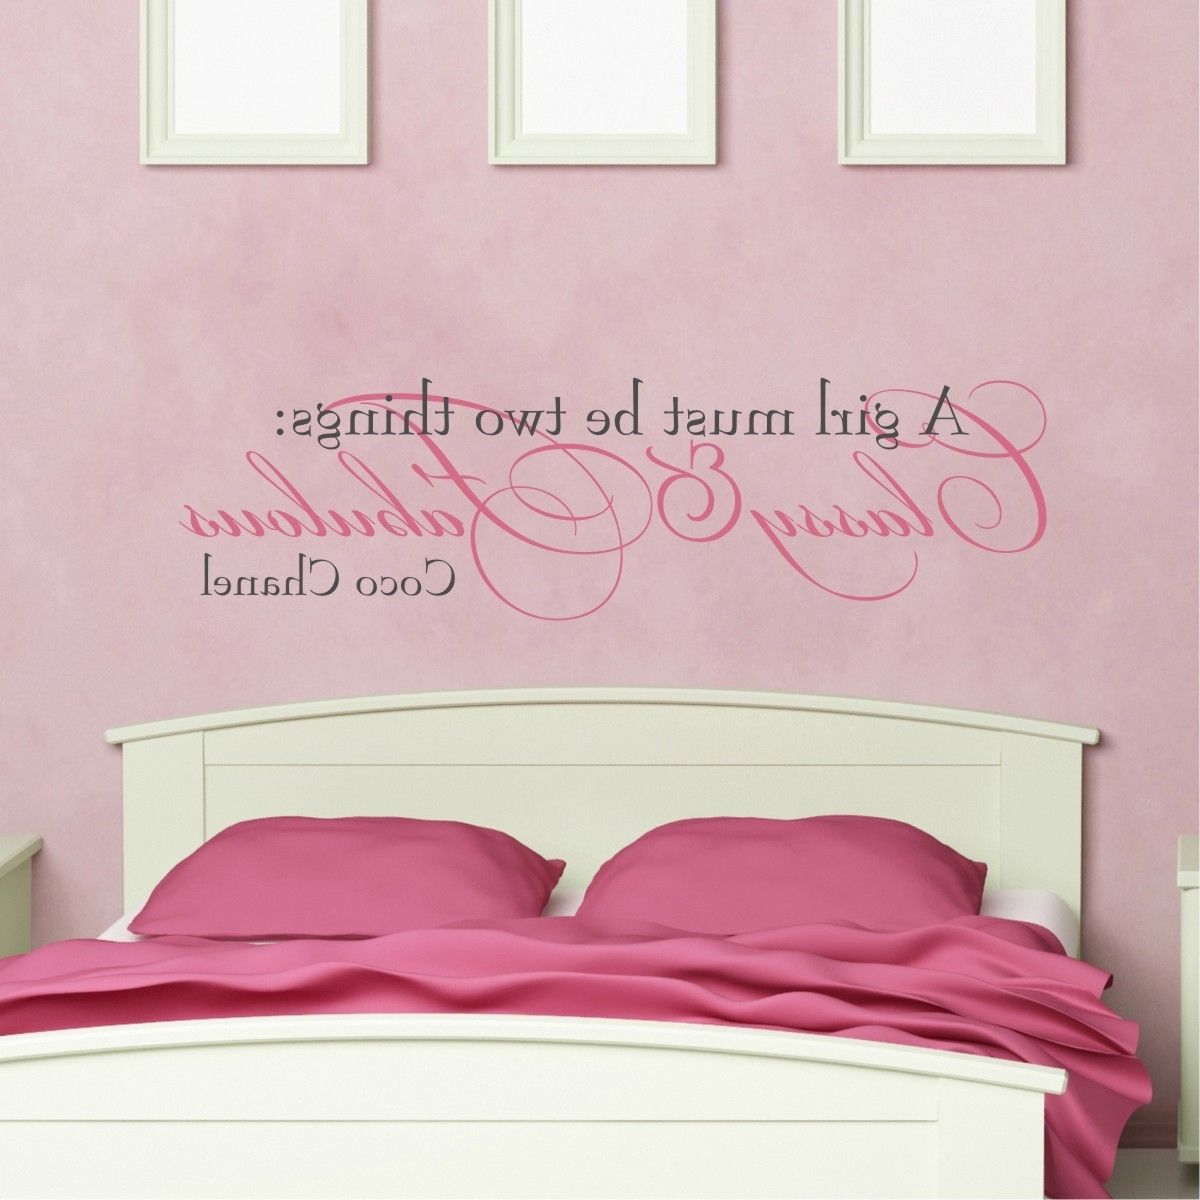 20 Best Bedroom Wall Art Images On Pinterest Ideas Shining Quotes For Recent Wall Art For Teenagers (View 15 of 15)